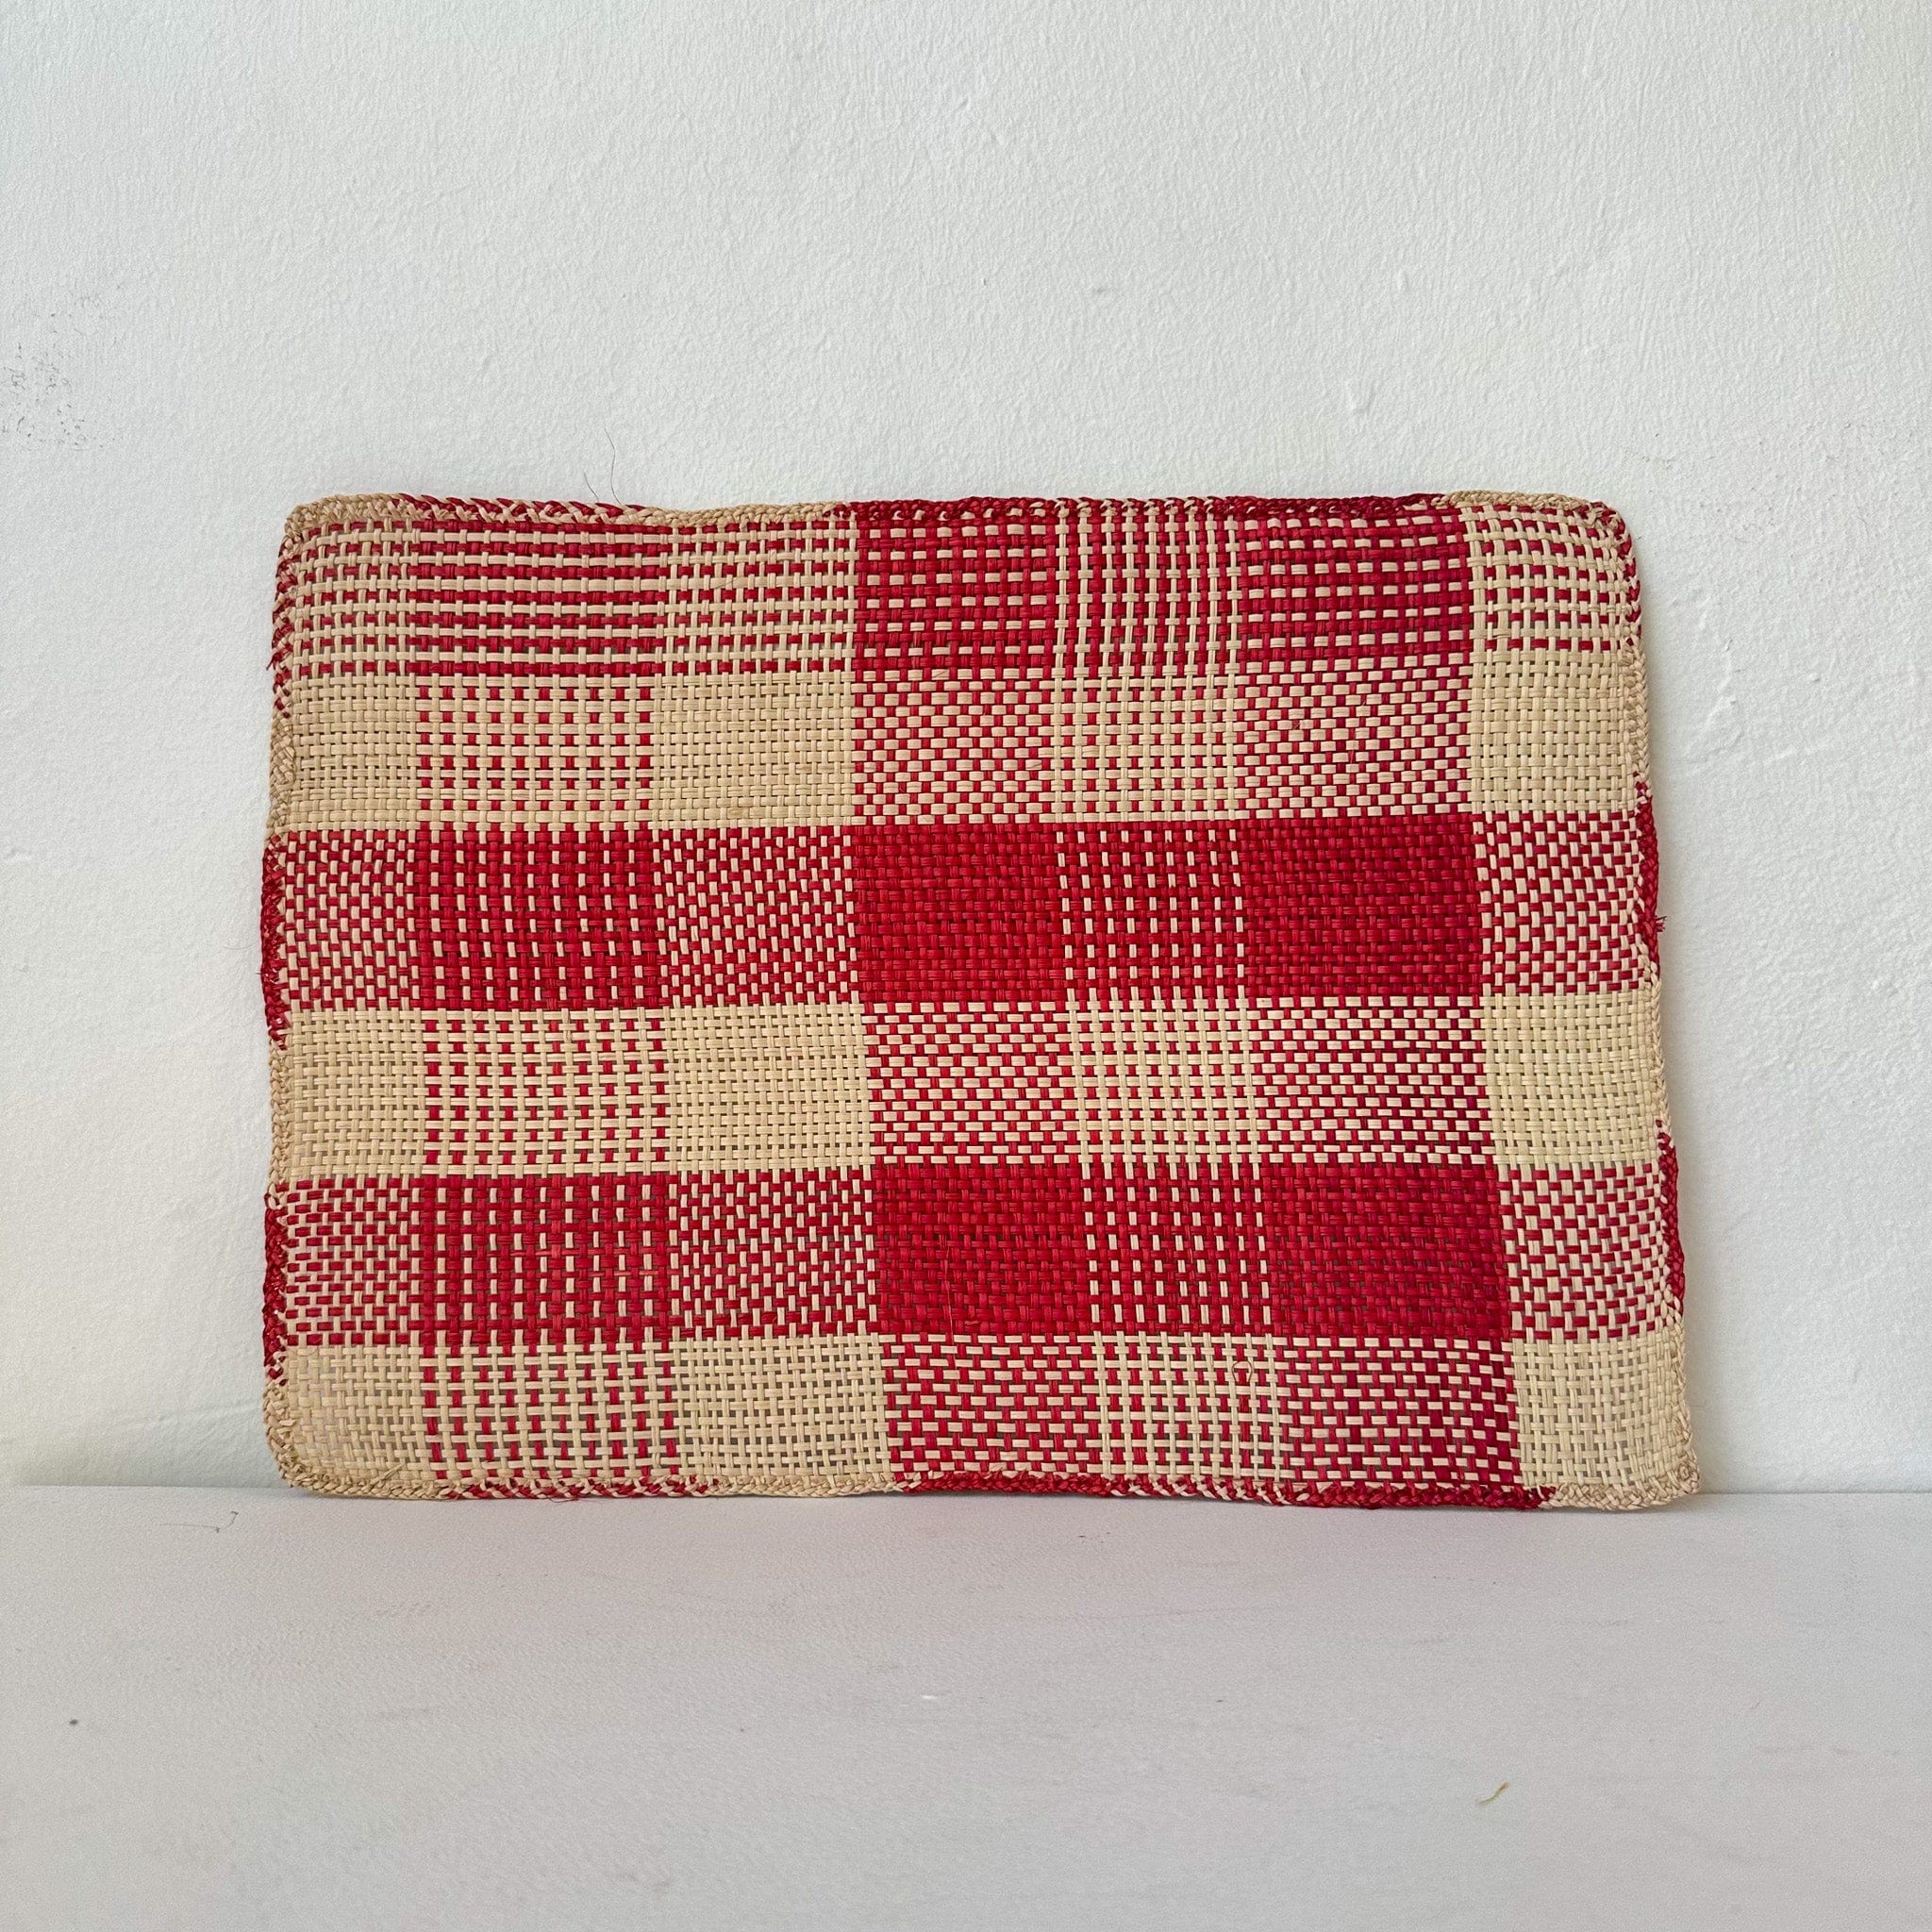 Guanabana Kitchen & Dining Beige/Red Plaid Straw Placemat by Guanabana